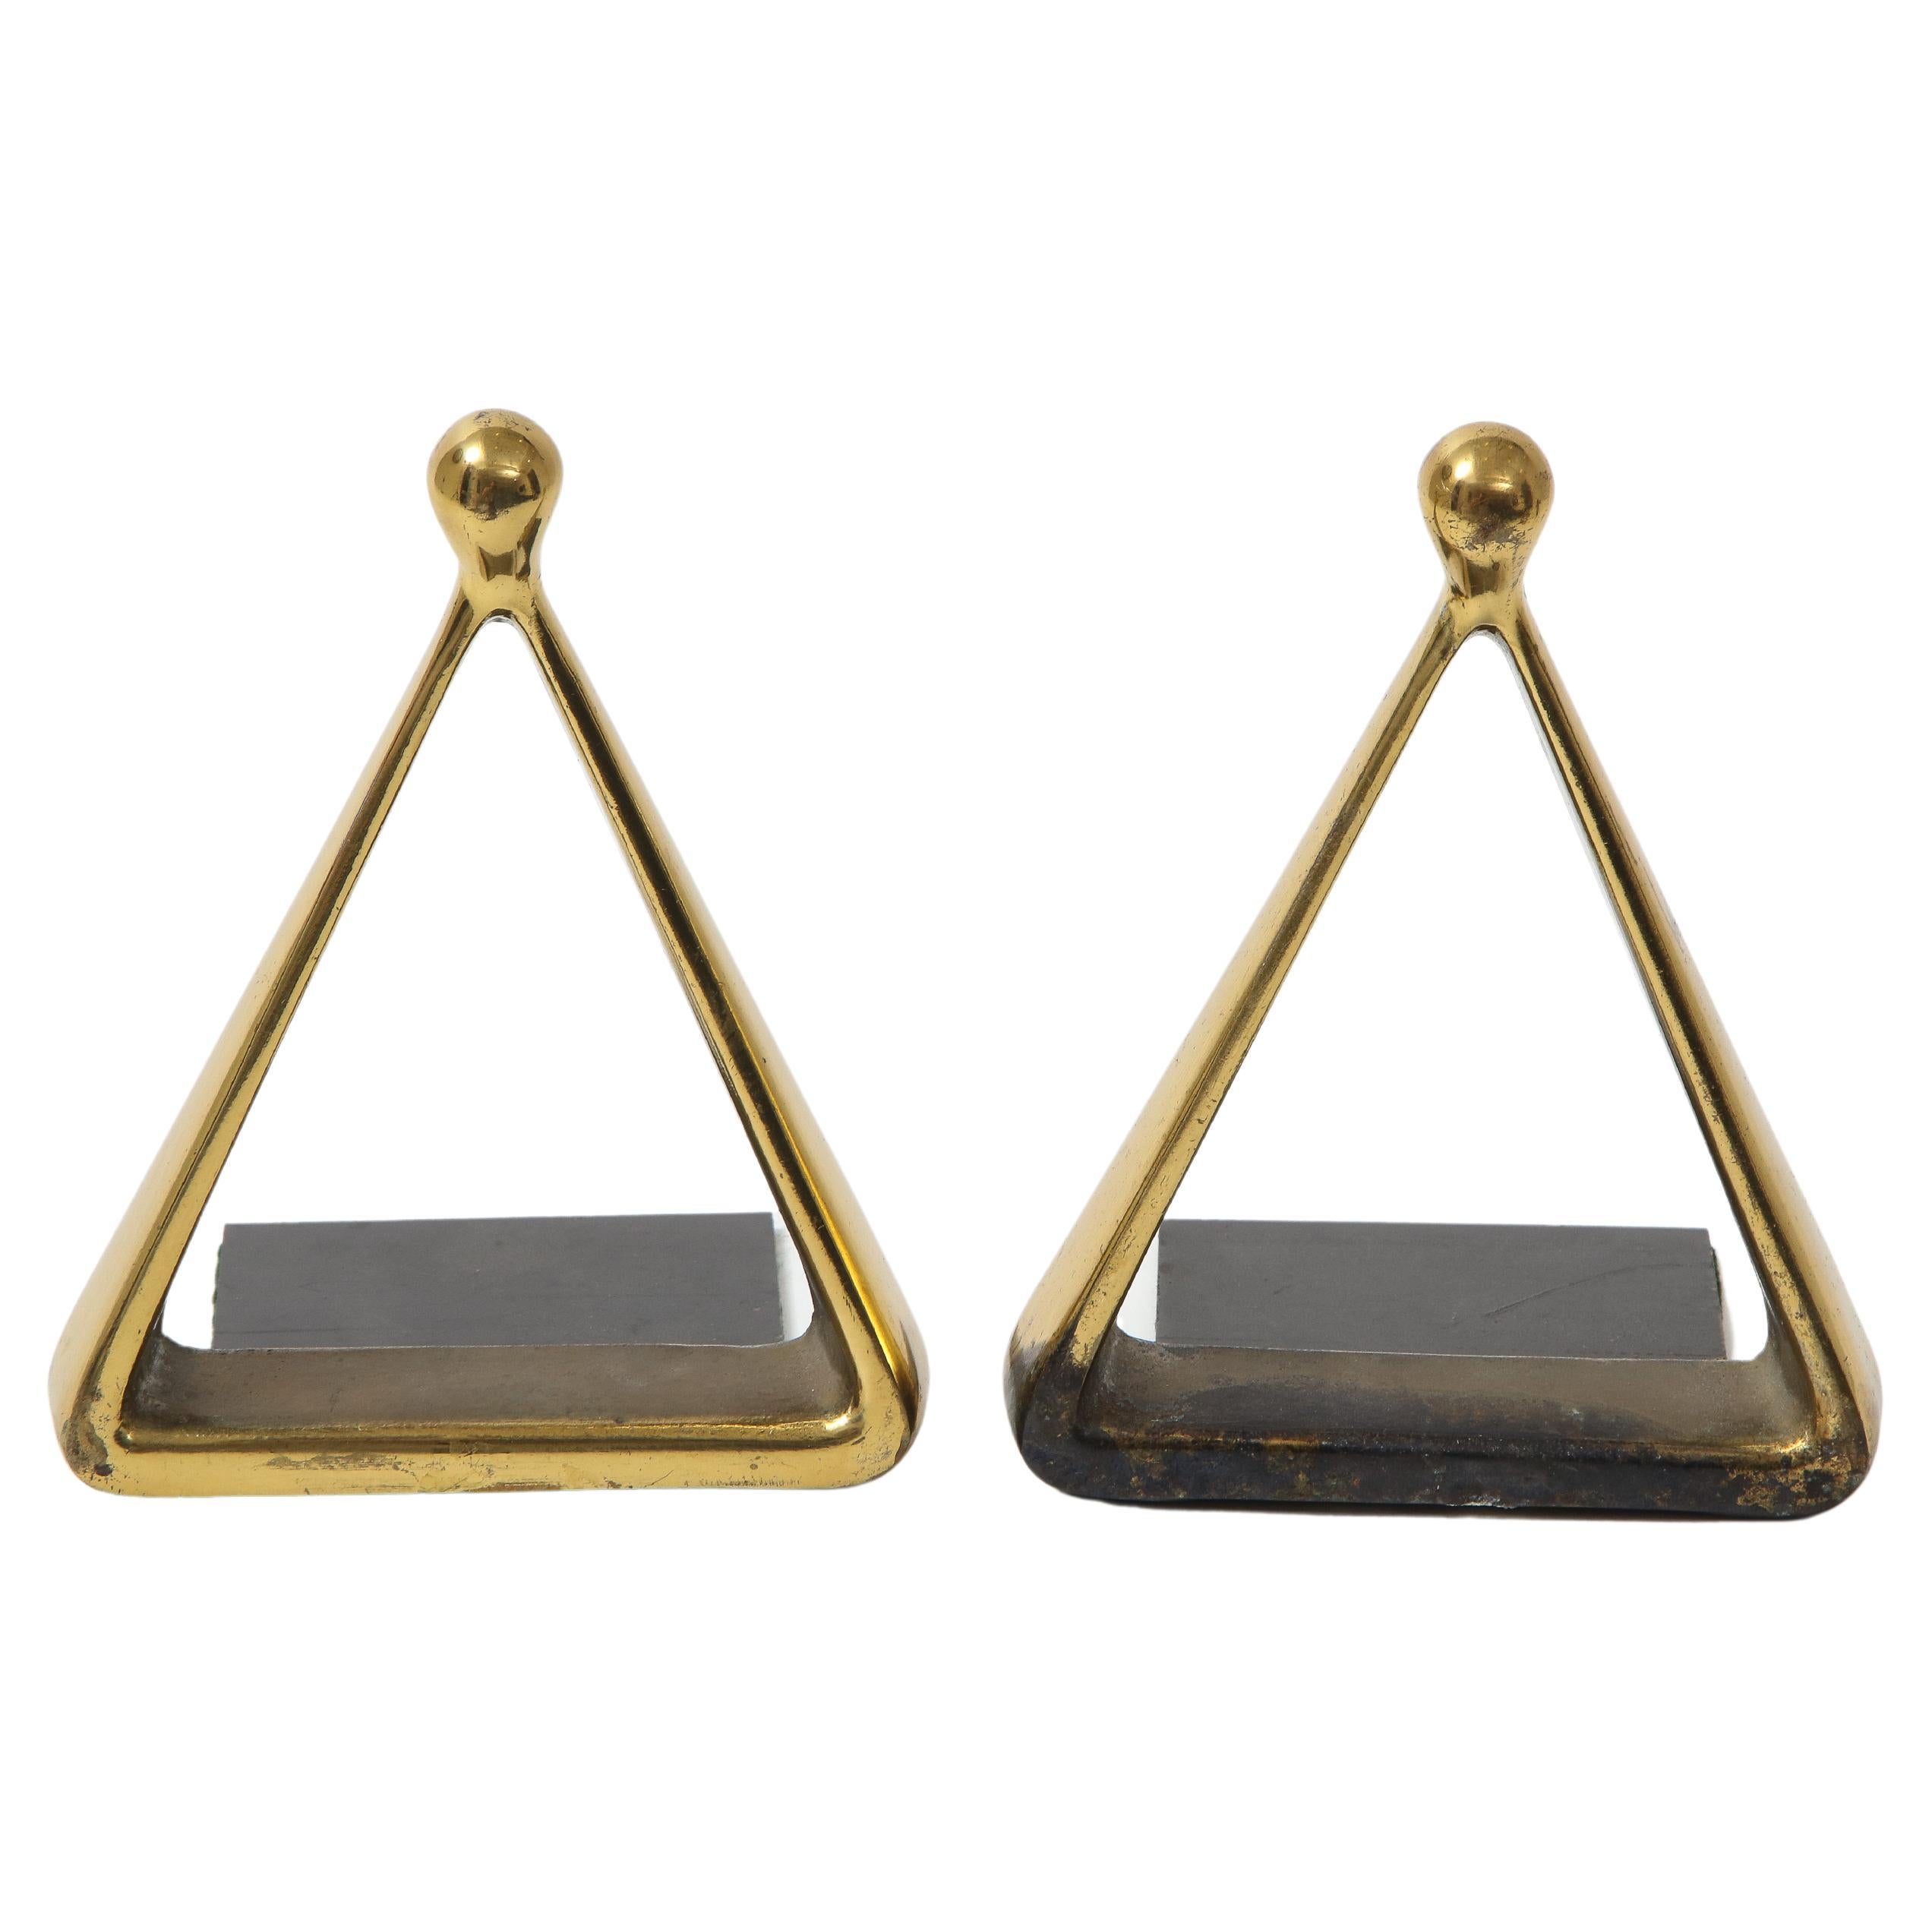 Ben Seibel Aged Brass Triangle Bookends